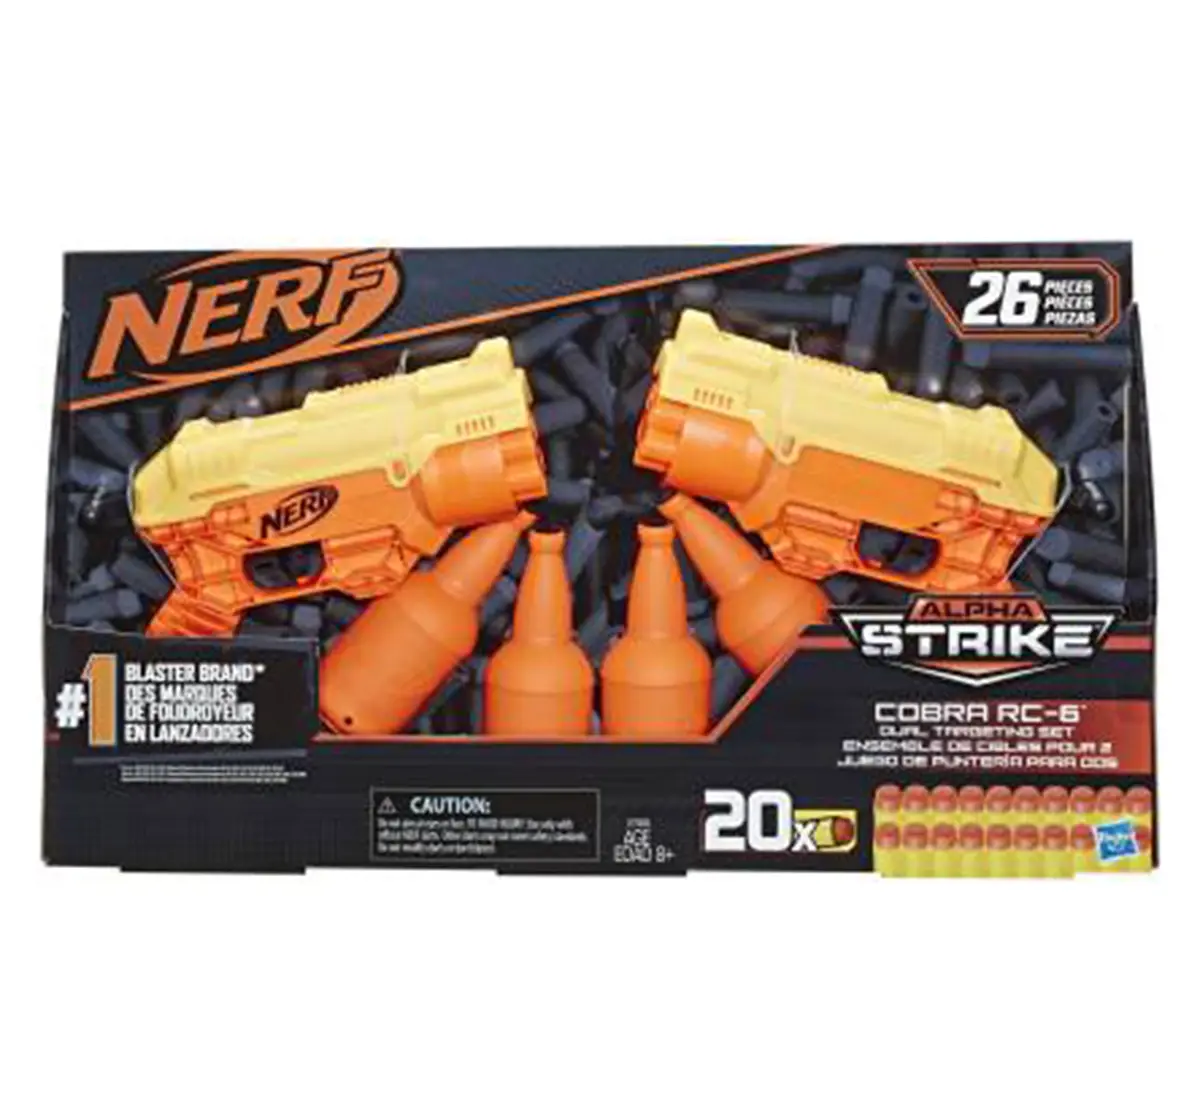 NERF Alpha Strike 26-Piece Cobra RC-6 Dual Targeting Set, Includes 2 Toy Blasters, 4 Half-Targets, and 20 Official Nerf Elite Darts, Multicolor, 8Y+